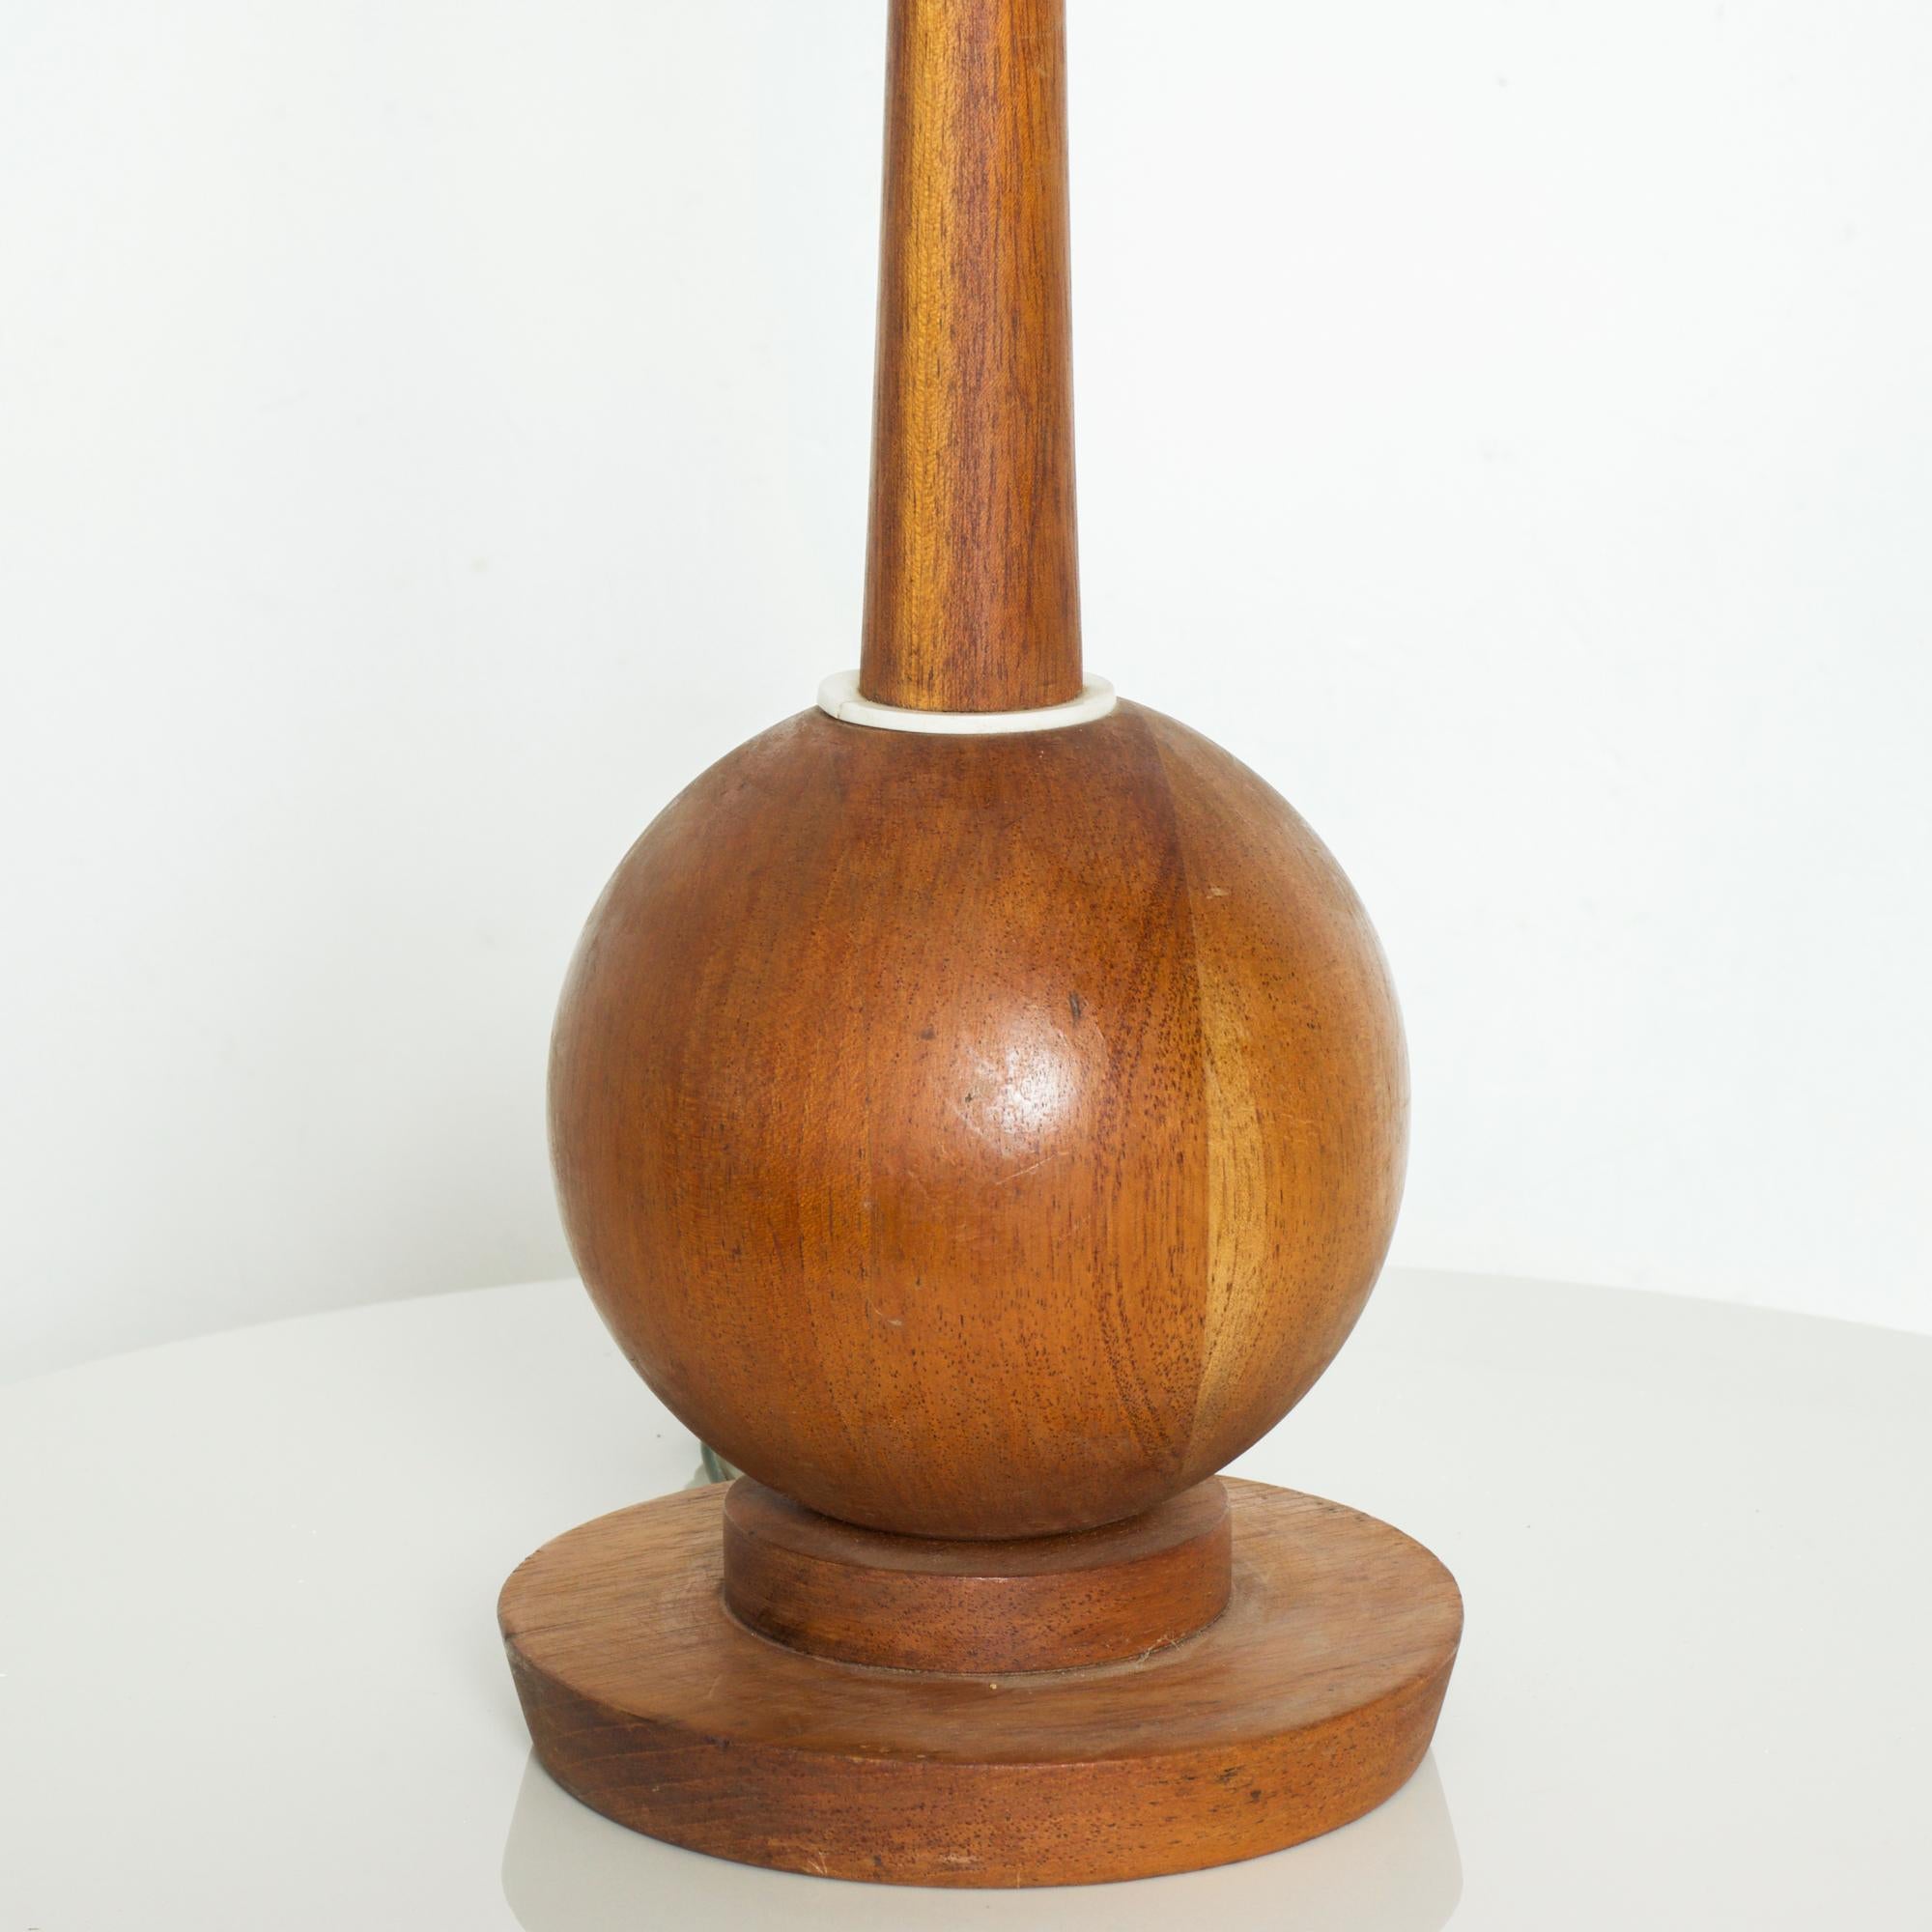 Midcentury Modernism in Mexican Mahogany Wood sculptural Globe Table Lamp with precise clean lines circa 1960s. Reminiscent of Tony Paul designs for Westwood.
Dimensions: 36